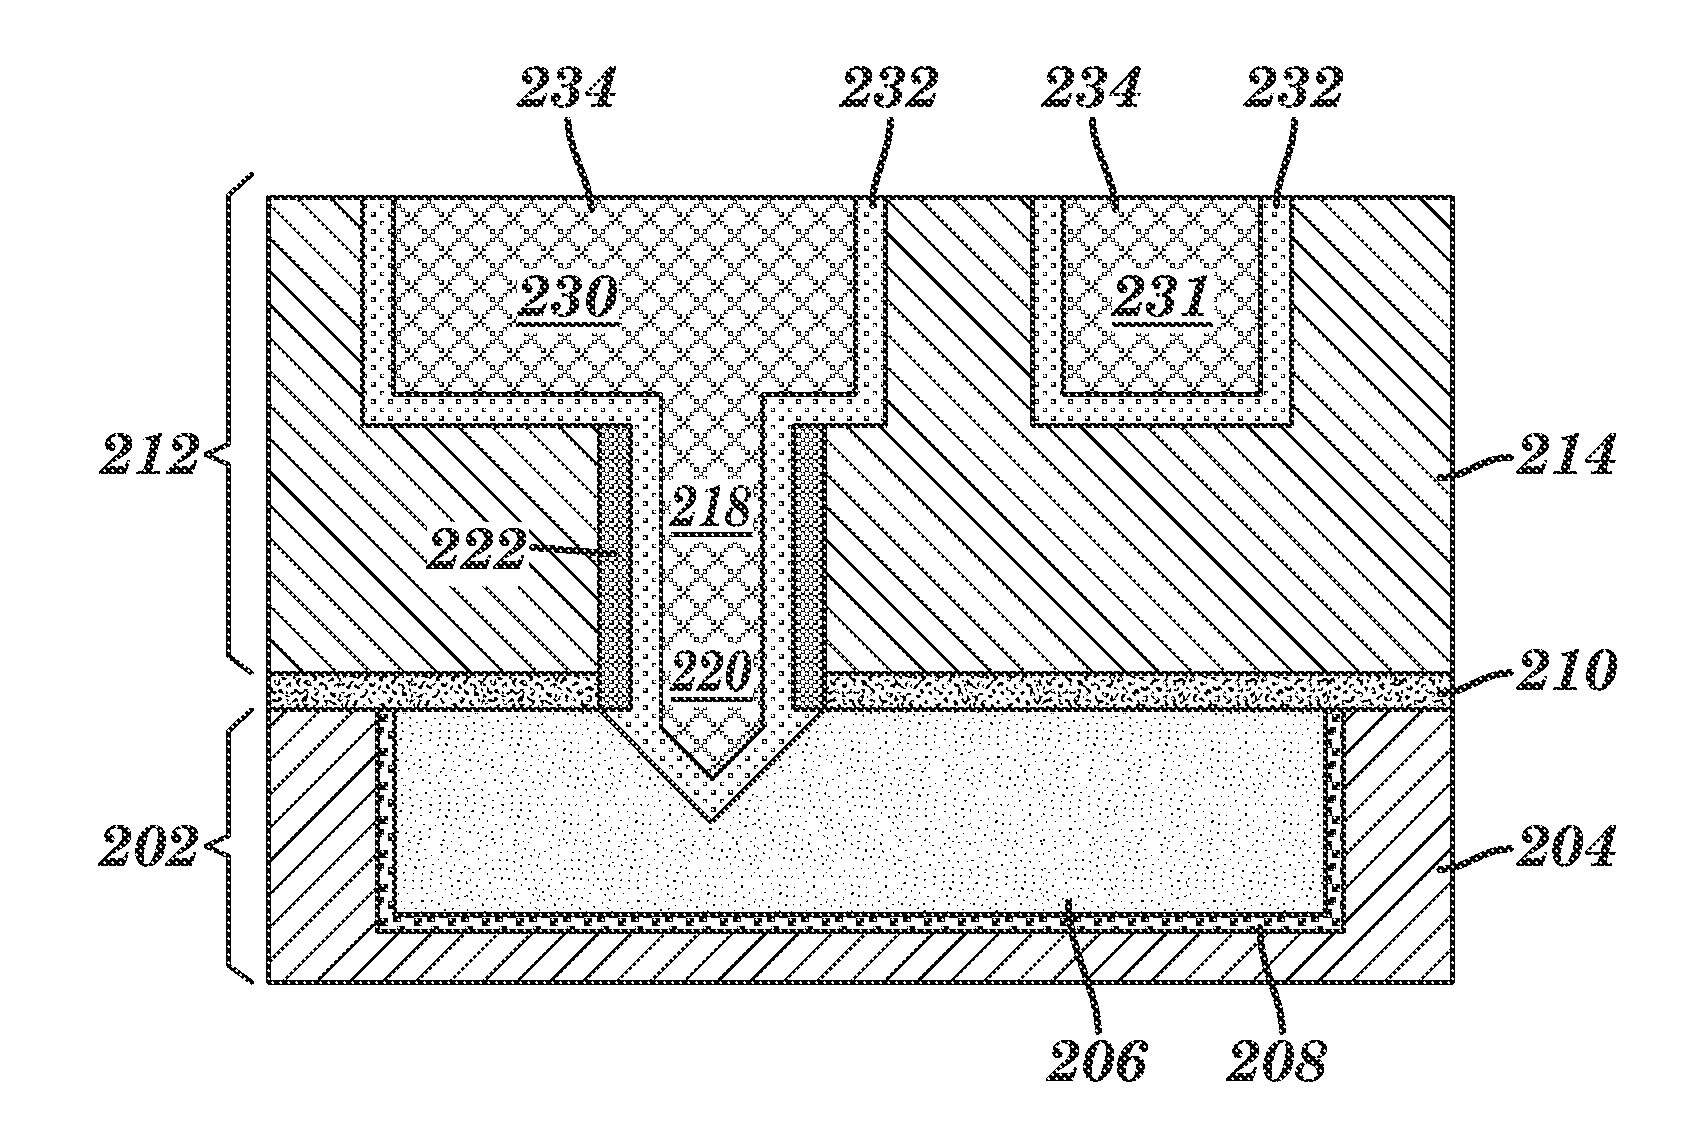 Interconnect structure having a via with a via gouging feature and dielectric liner sidewalls for BEOL integration